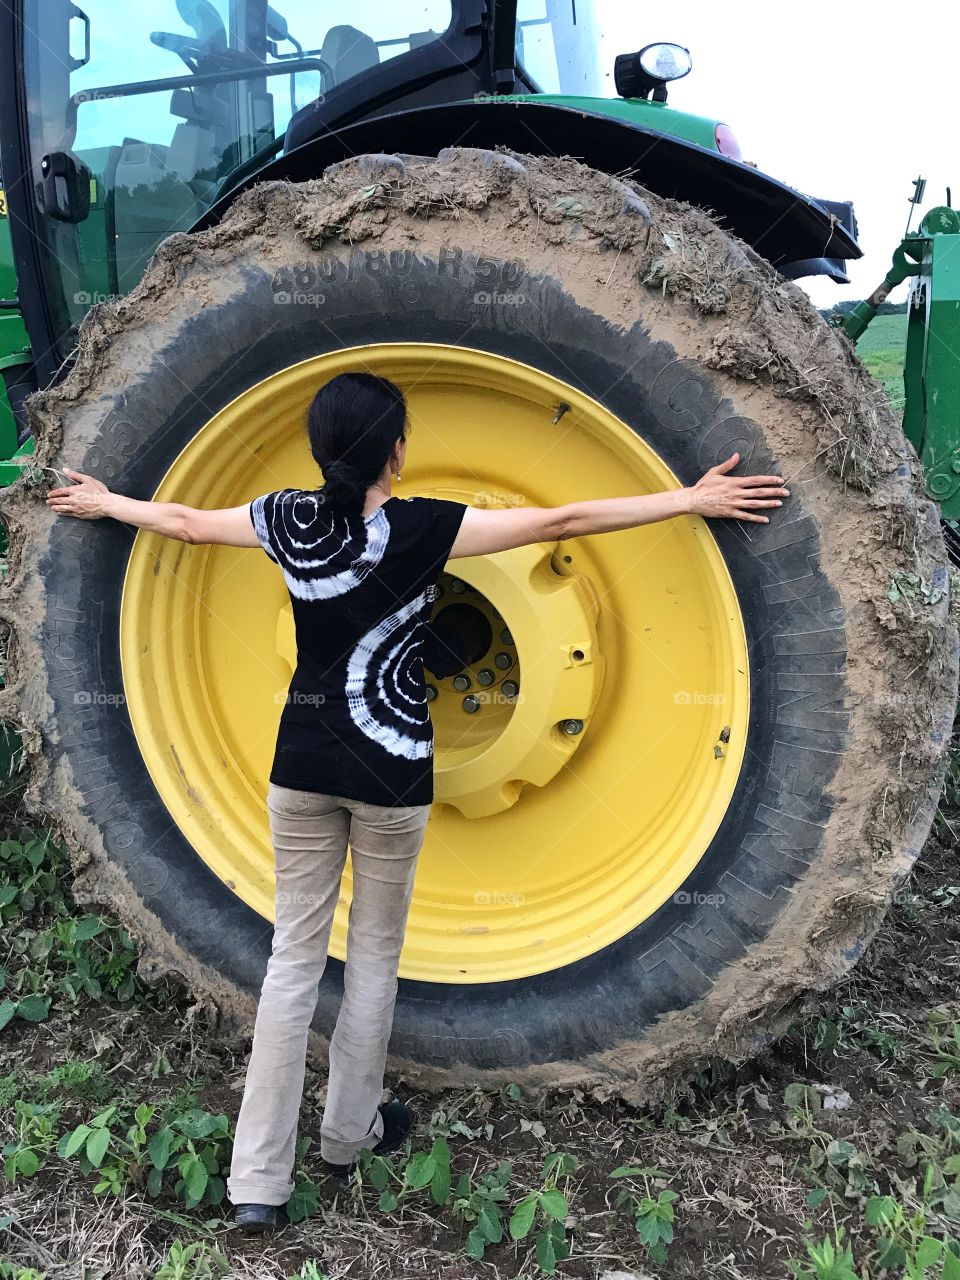 John deer tire the length of the arms